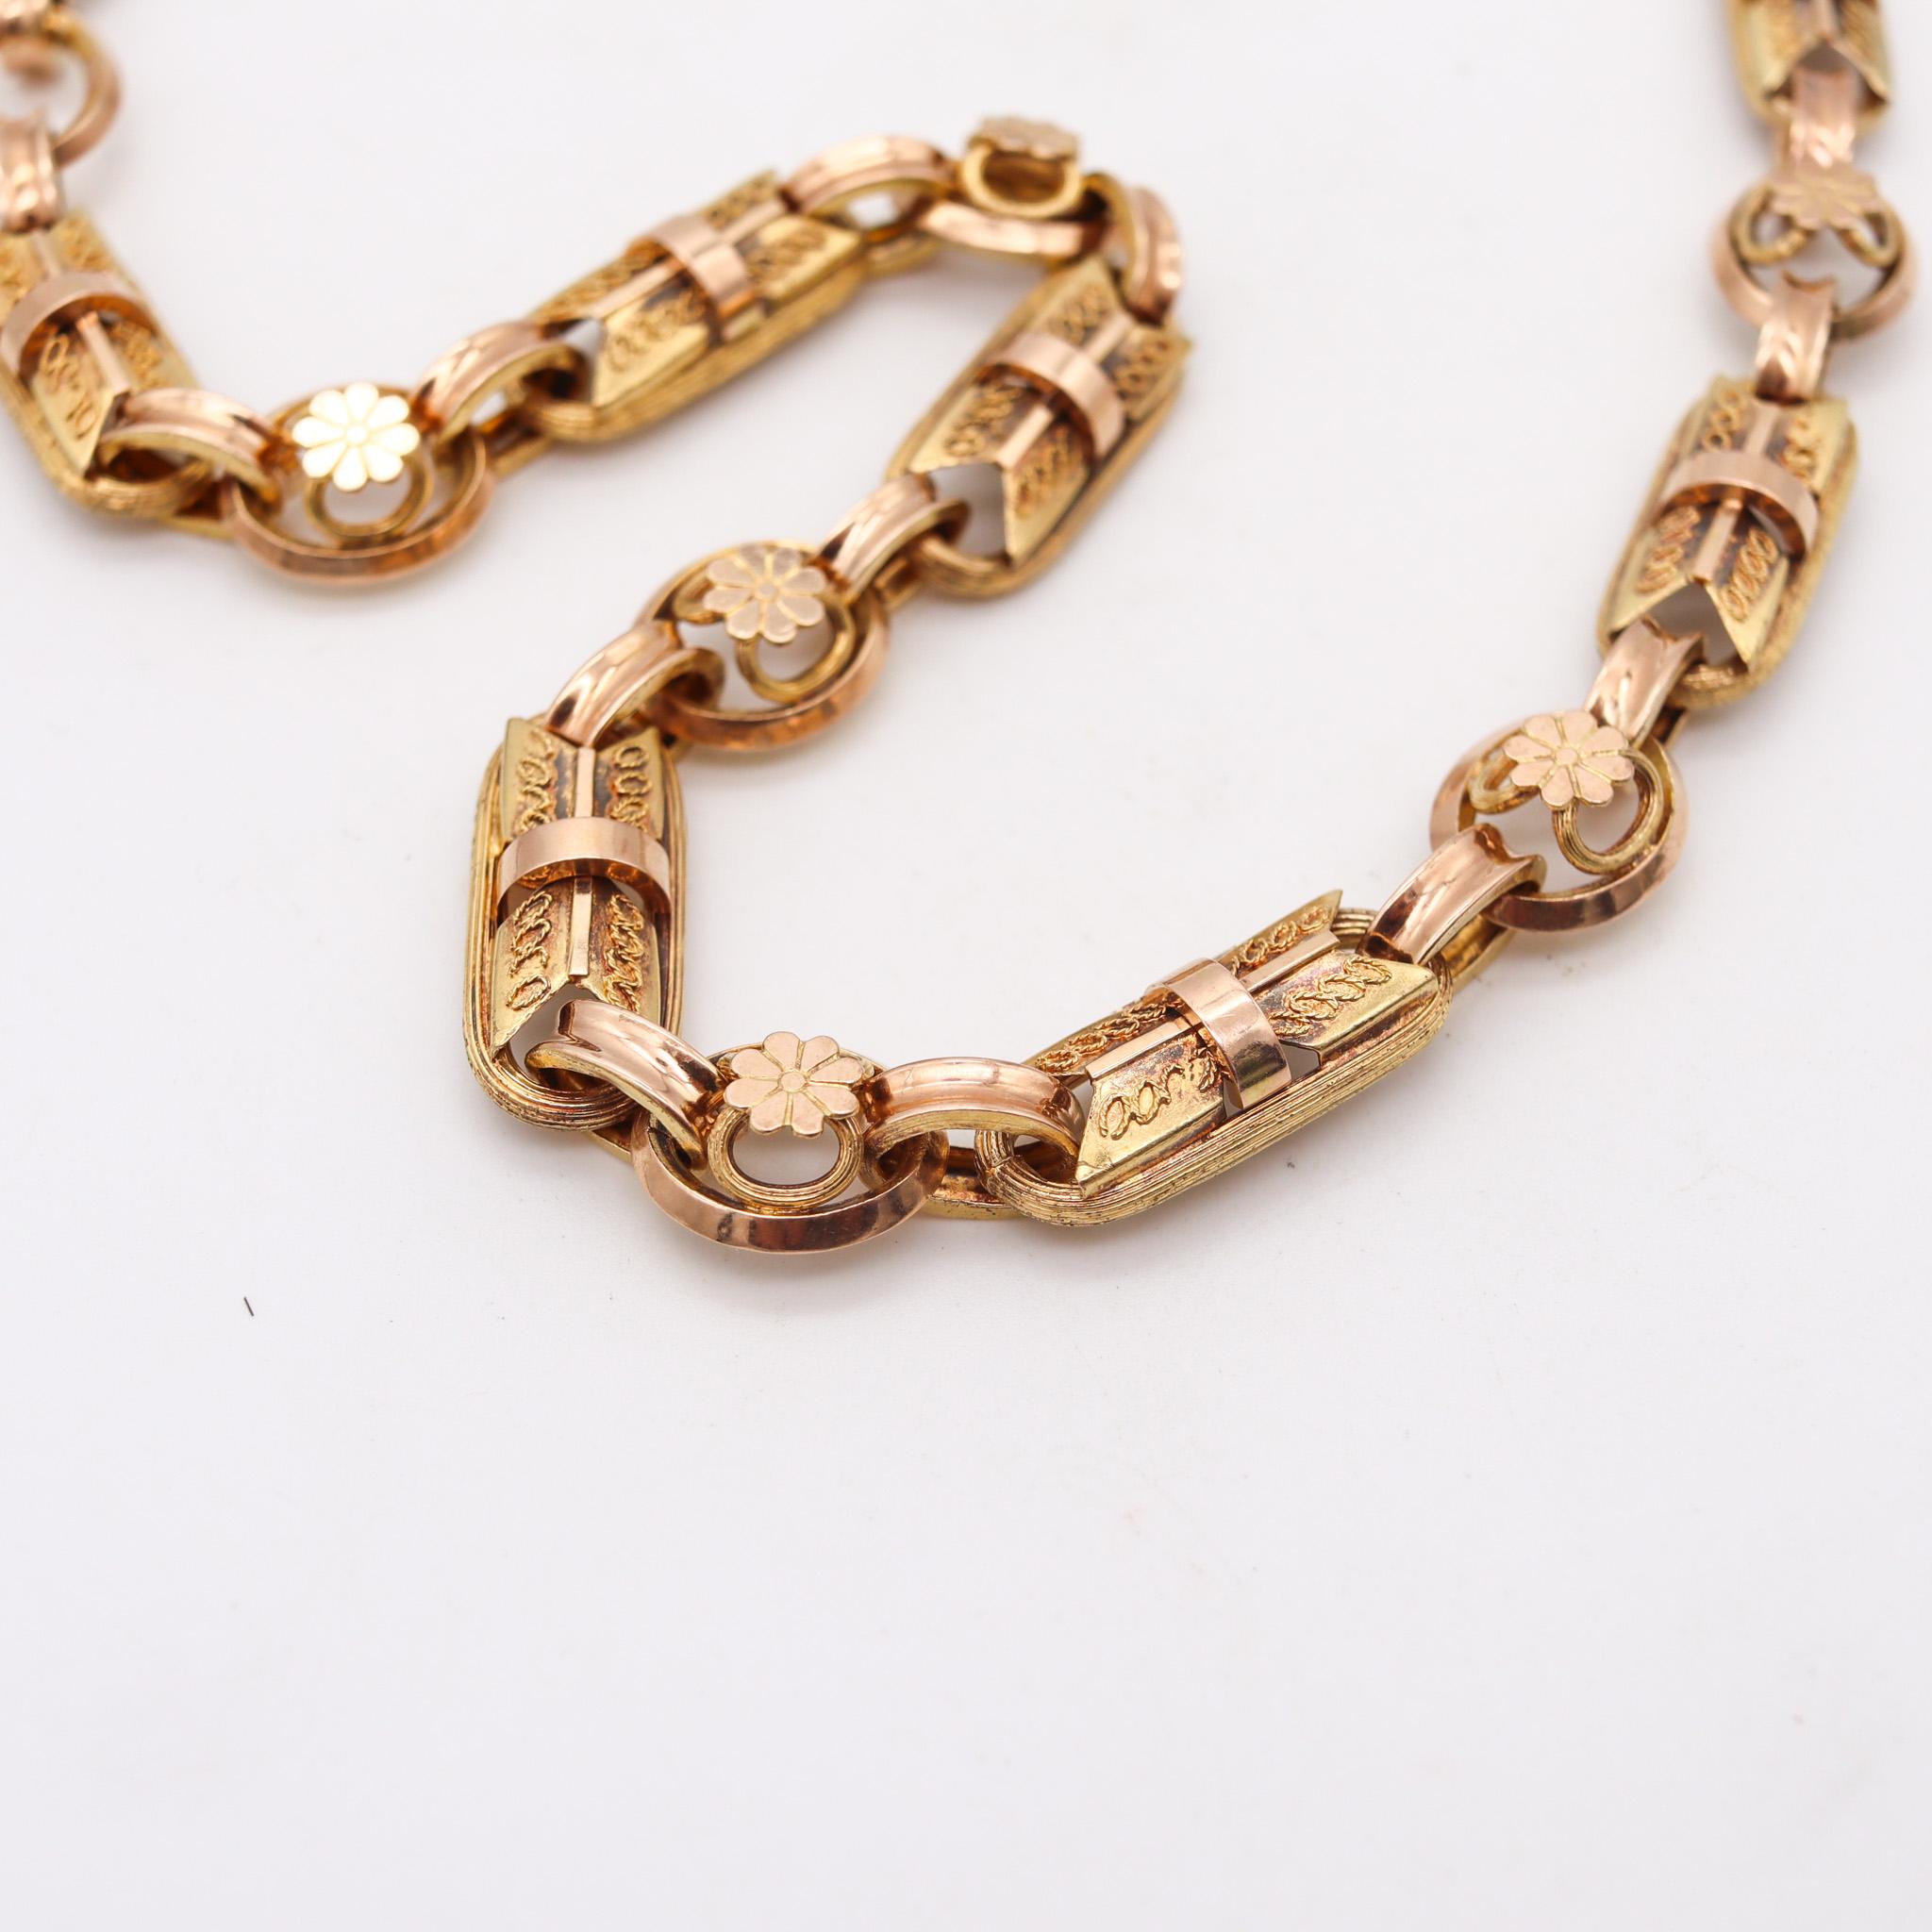 An England necklace from the Victorian period.

Beautiful necklace-chain, created in England during the Victorian period (1837-1901), back in the 1880. This piece was made up by multiples links, with complicated geometric patterns which are